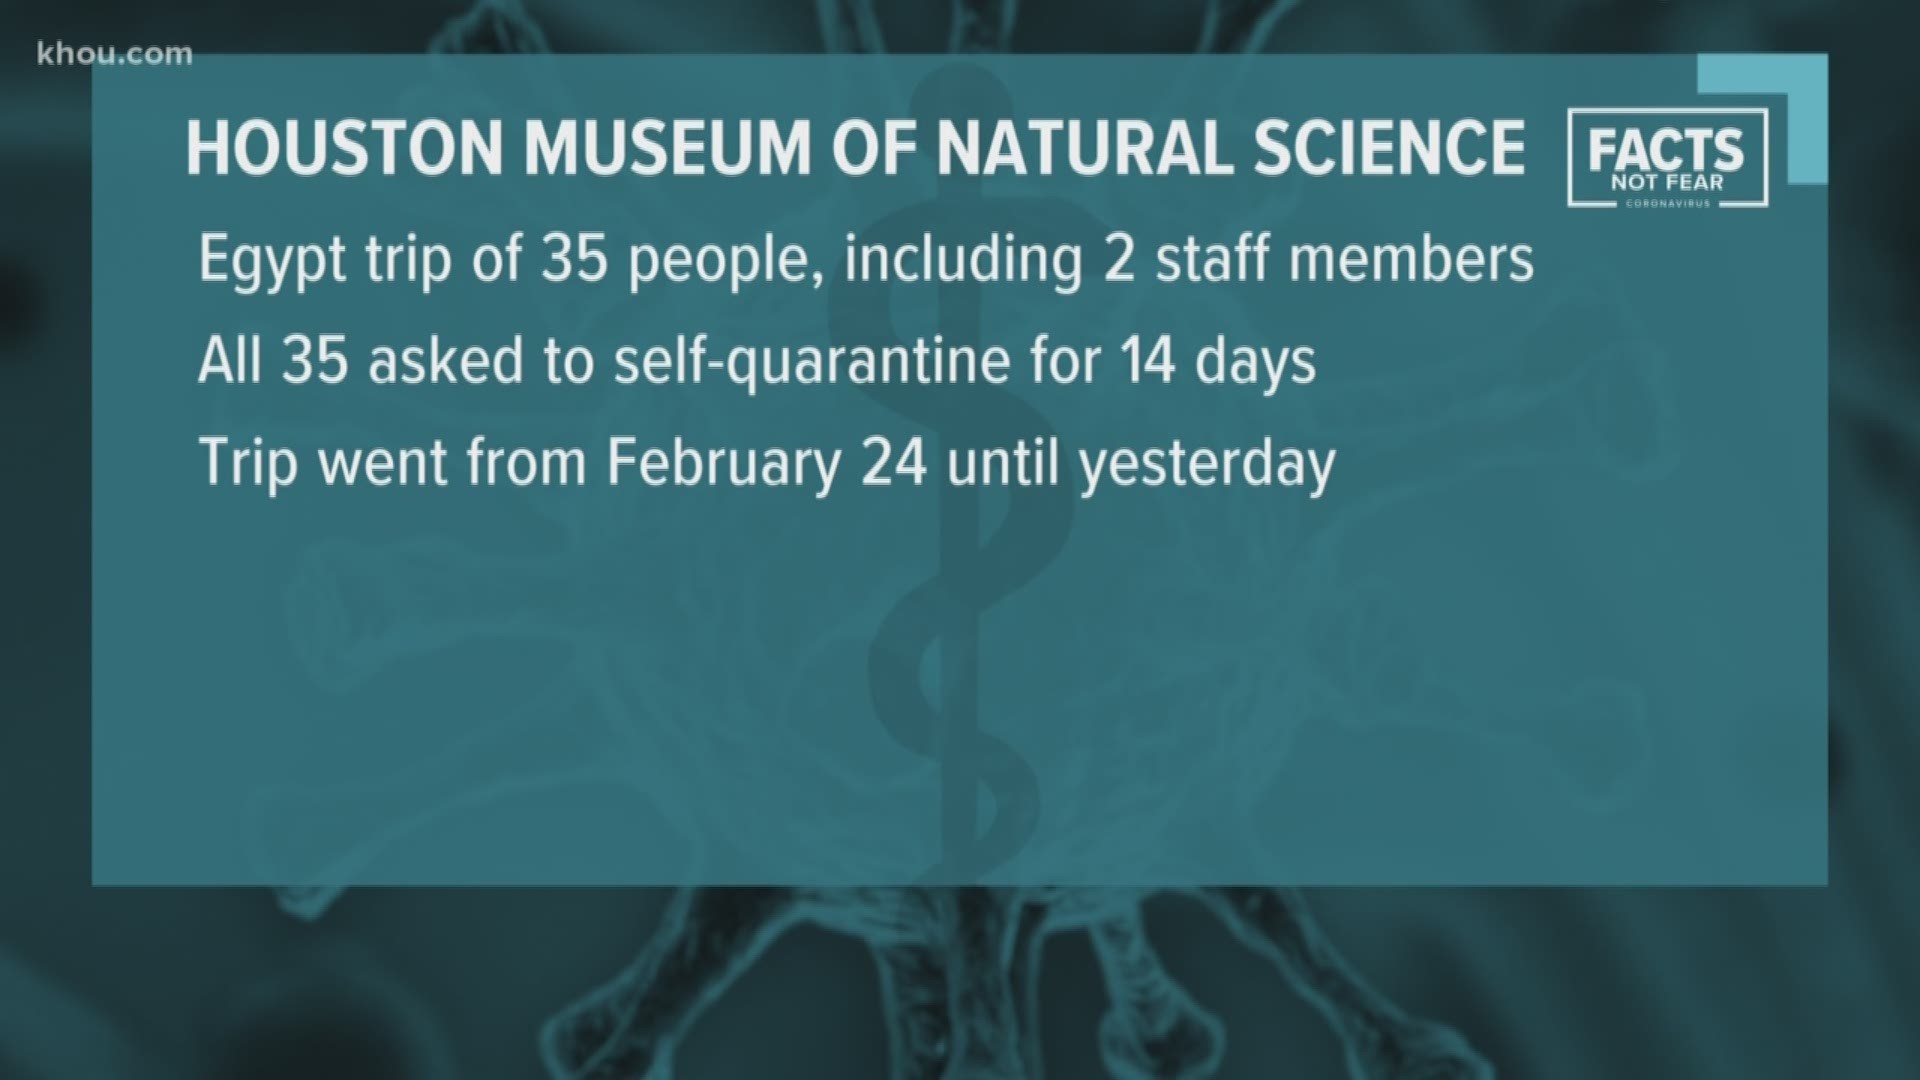 The Houston Museum of Natural Science has asked 35 travelers, including two staff members, to self-quarantine for 14 days after a trip to Egypt.